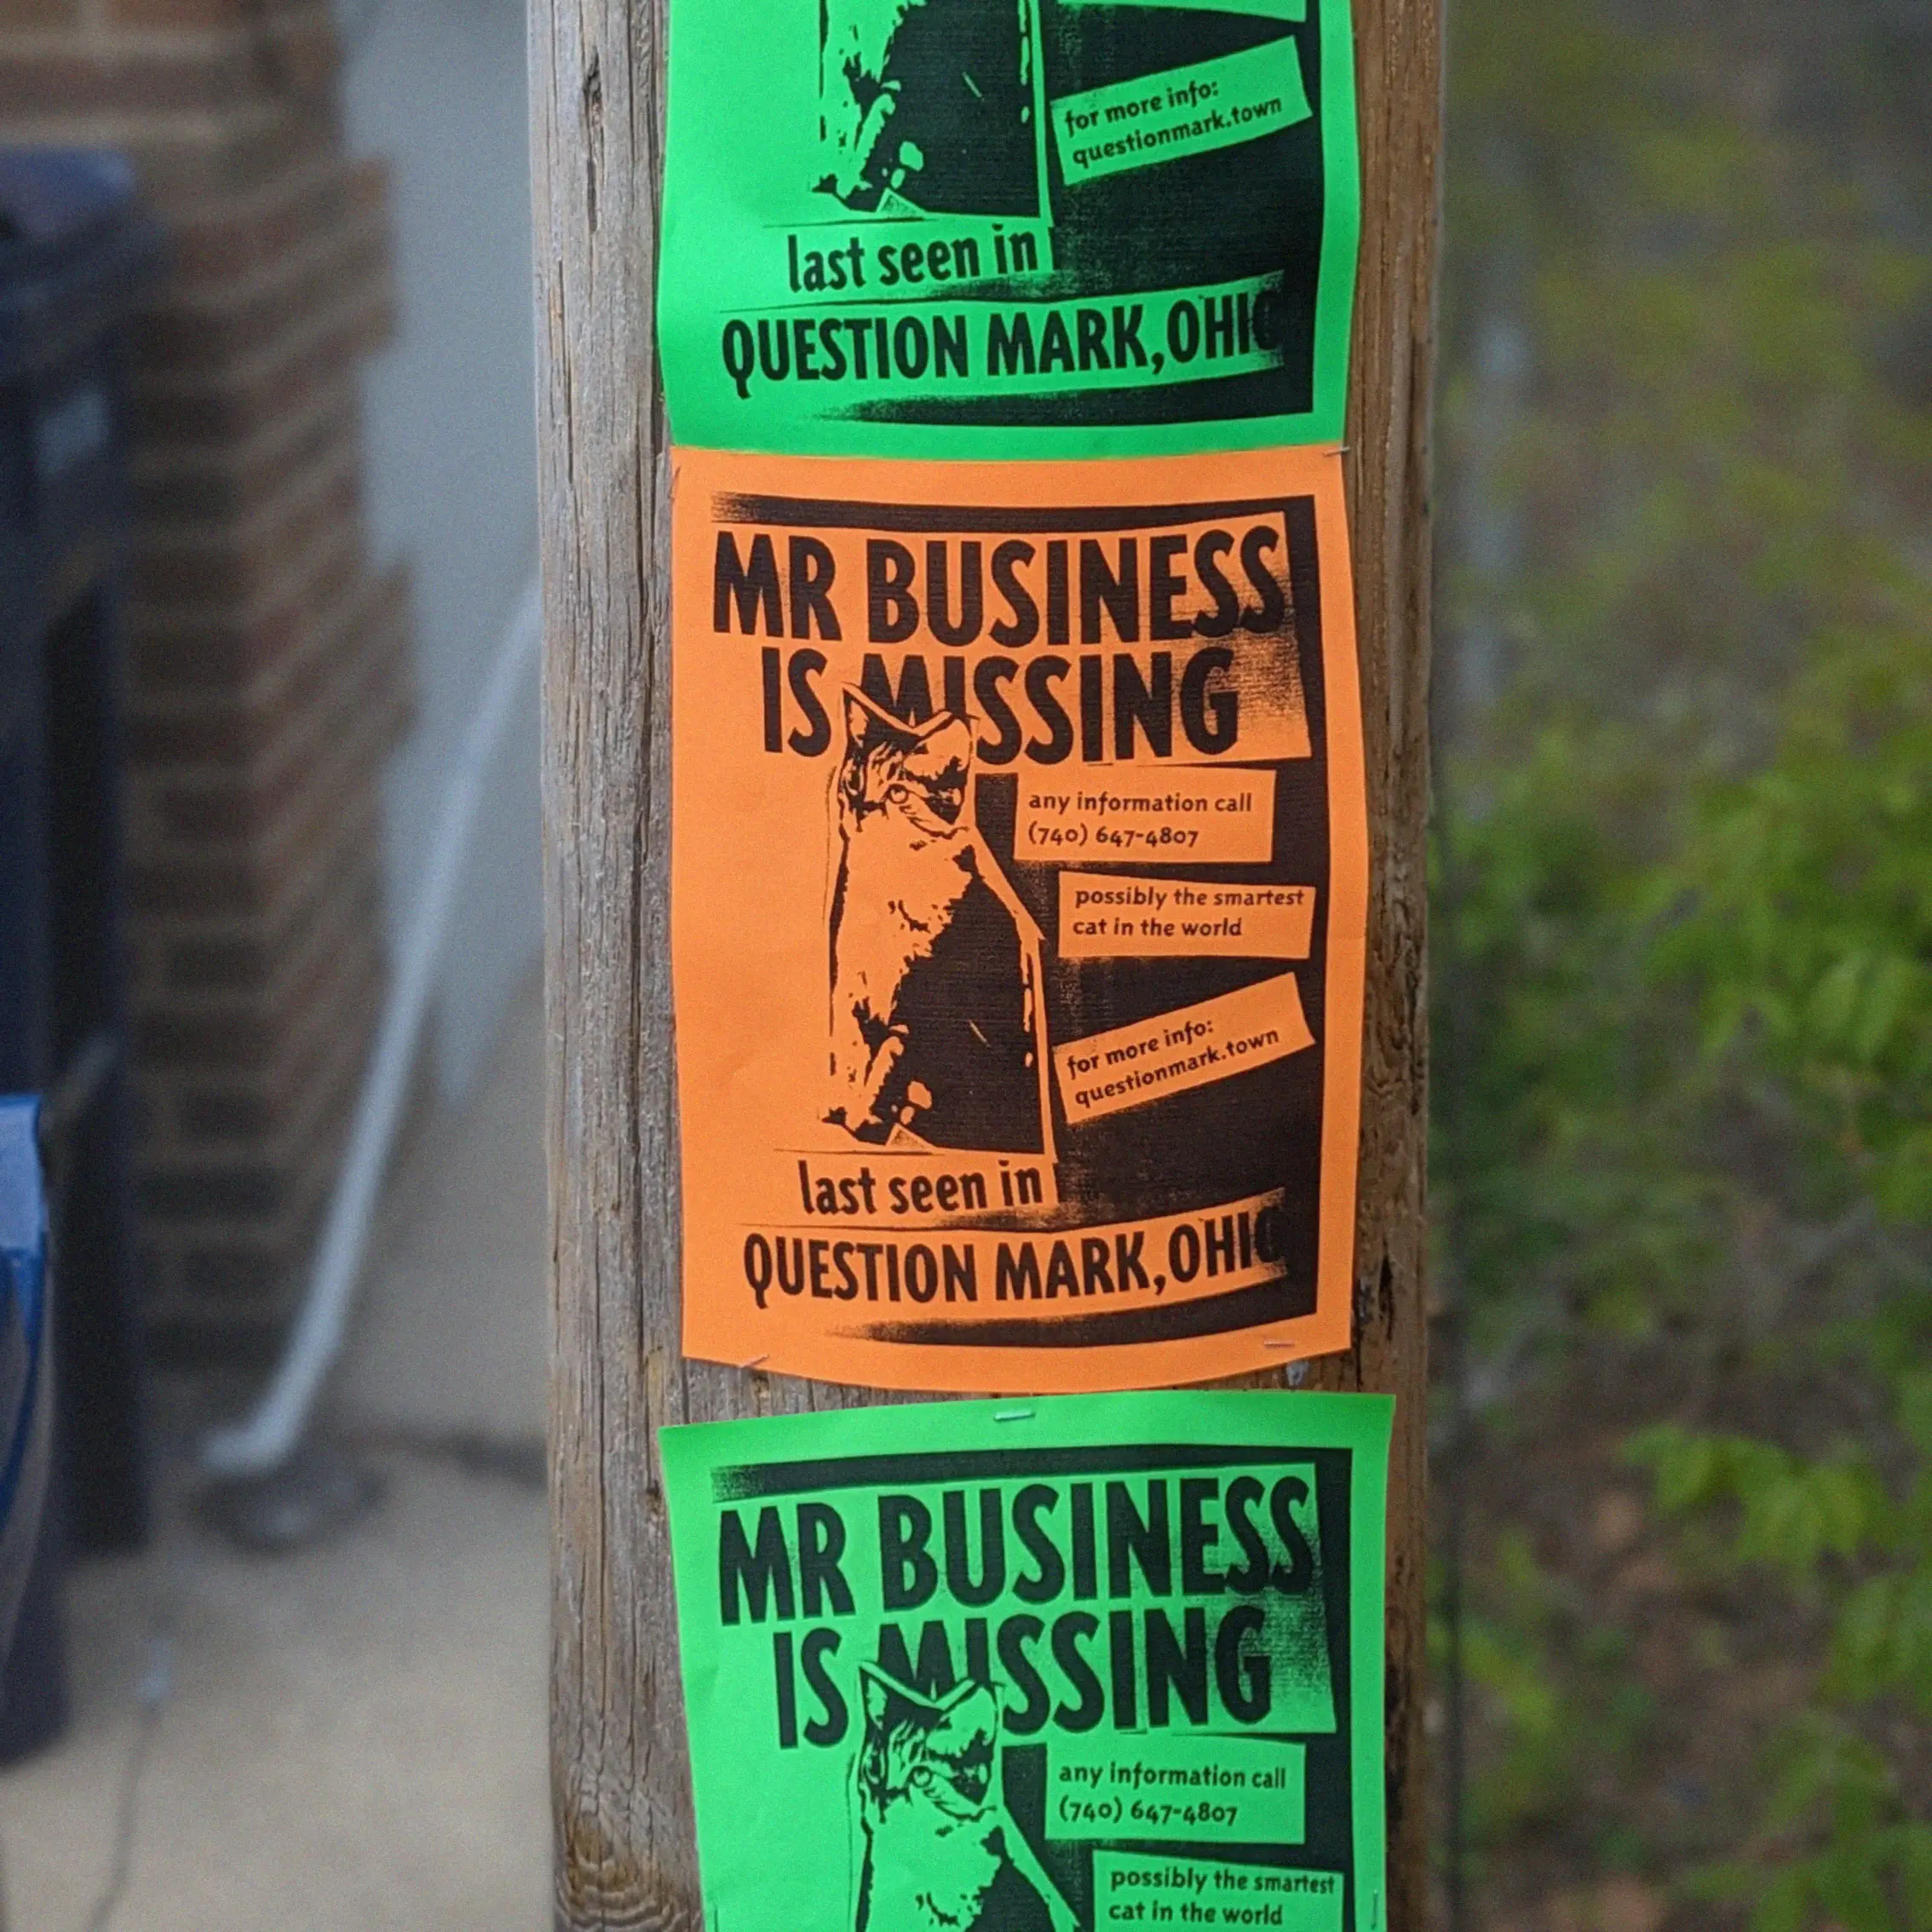 a photograph of three flyers stapled to a telephone poll. The flyers are bright orange and green and read MR BUSINESS IS MISSING with a poorly photocopied picture of a cat. Then they say 'any information call (740) 647-4807' and 'possibly the smartest cat in the world' and 'for more info questionmark.town' and finally LAST SEEN IN QUESTION MARK OHIO.